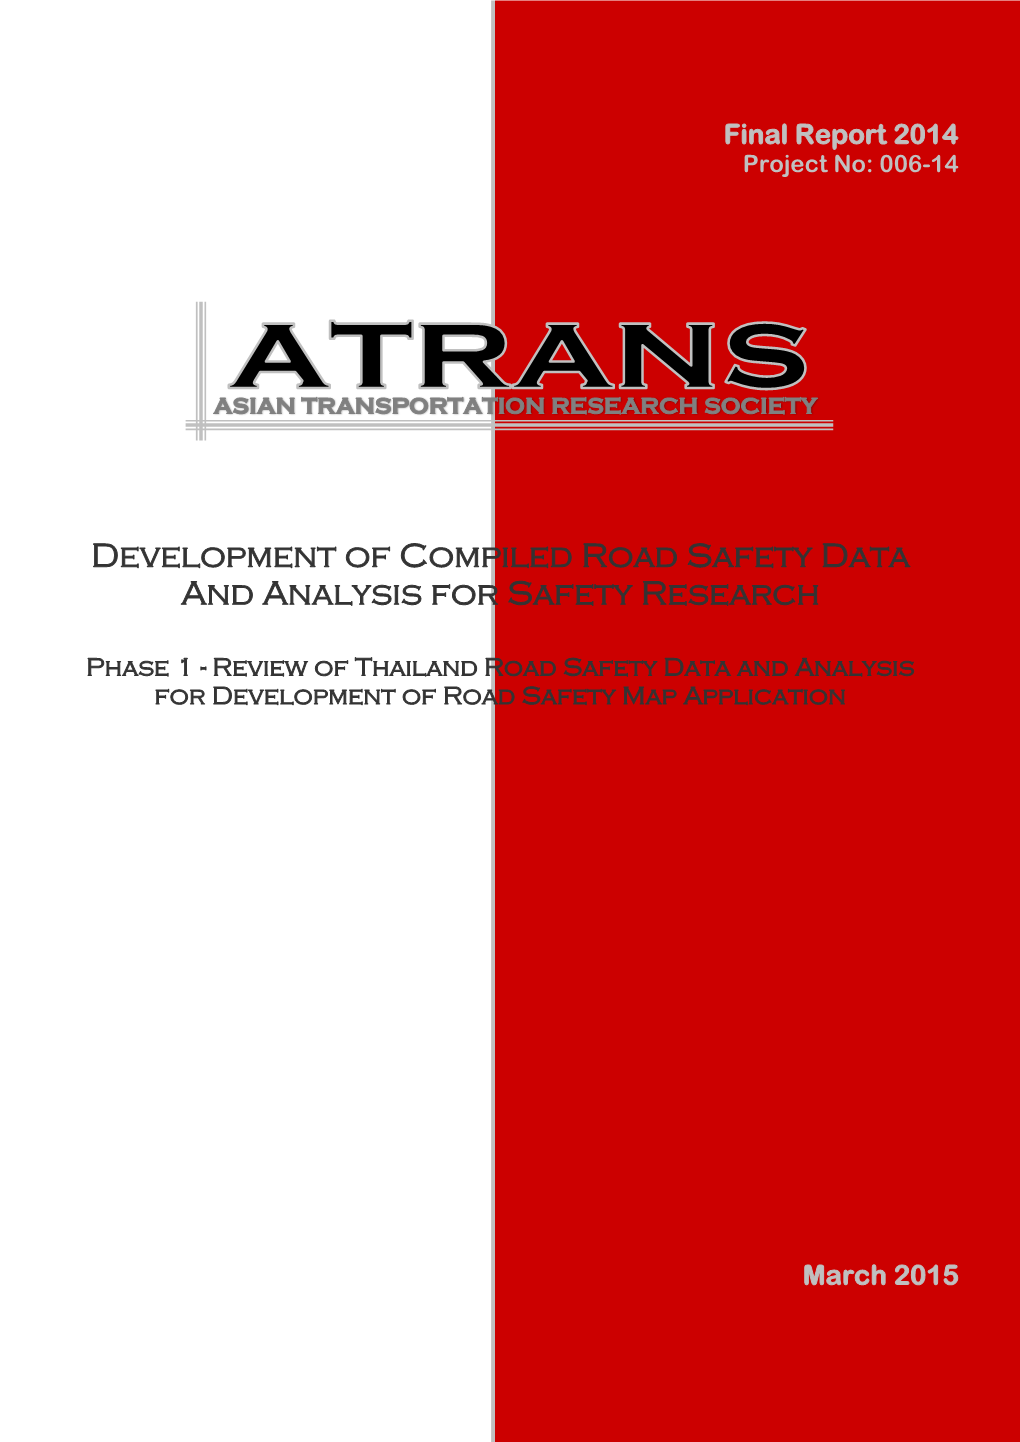 Development of Compiled Road Safety Data and Analysis for Safety Research